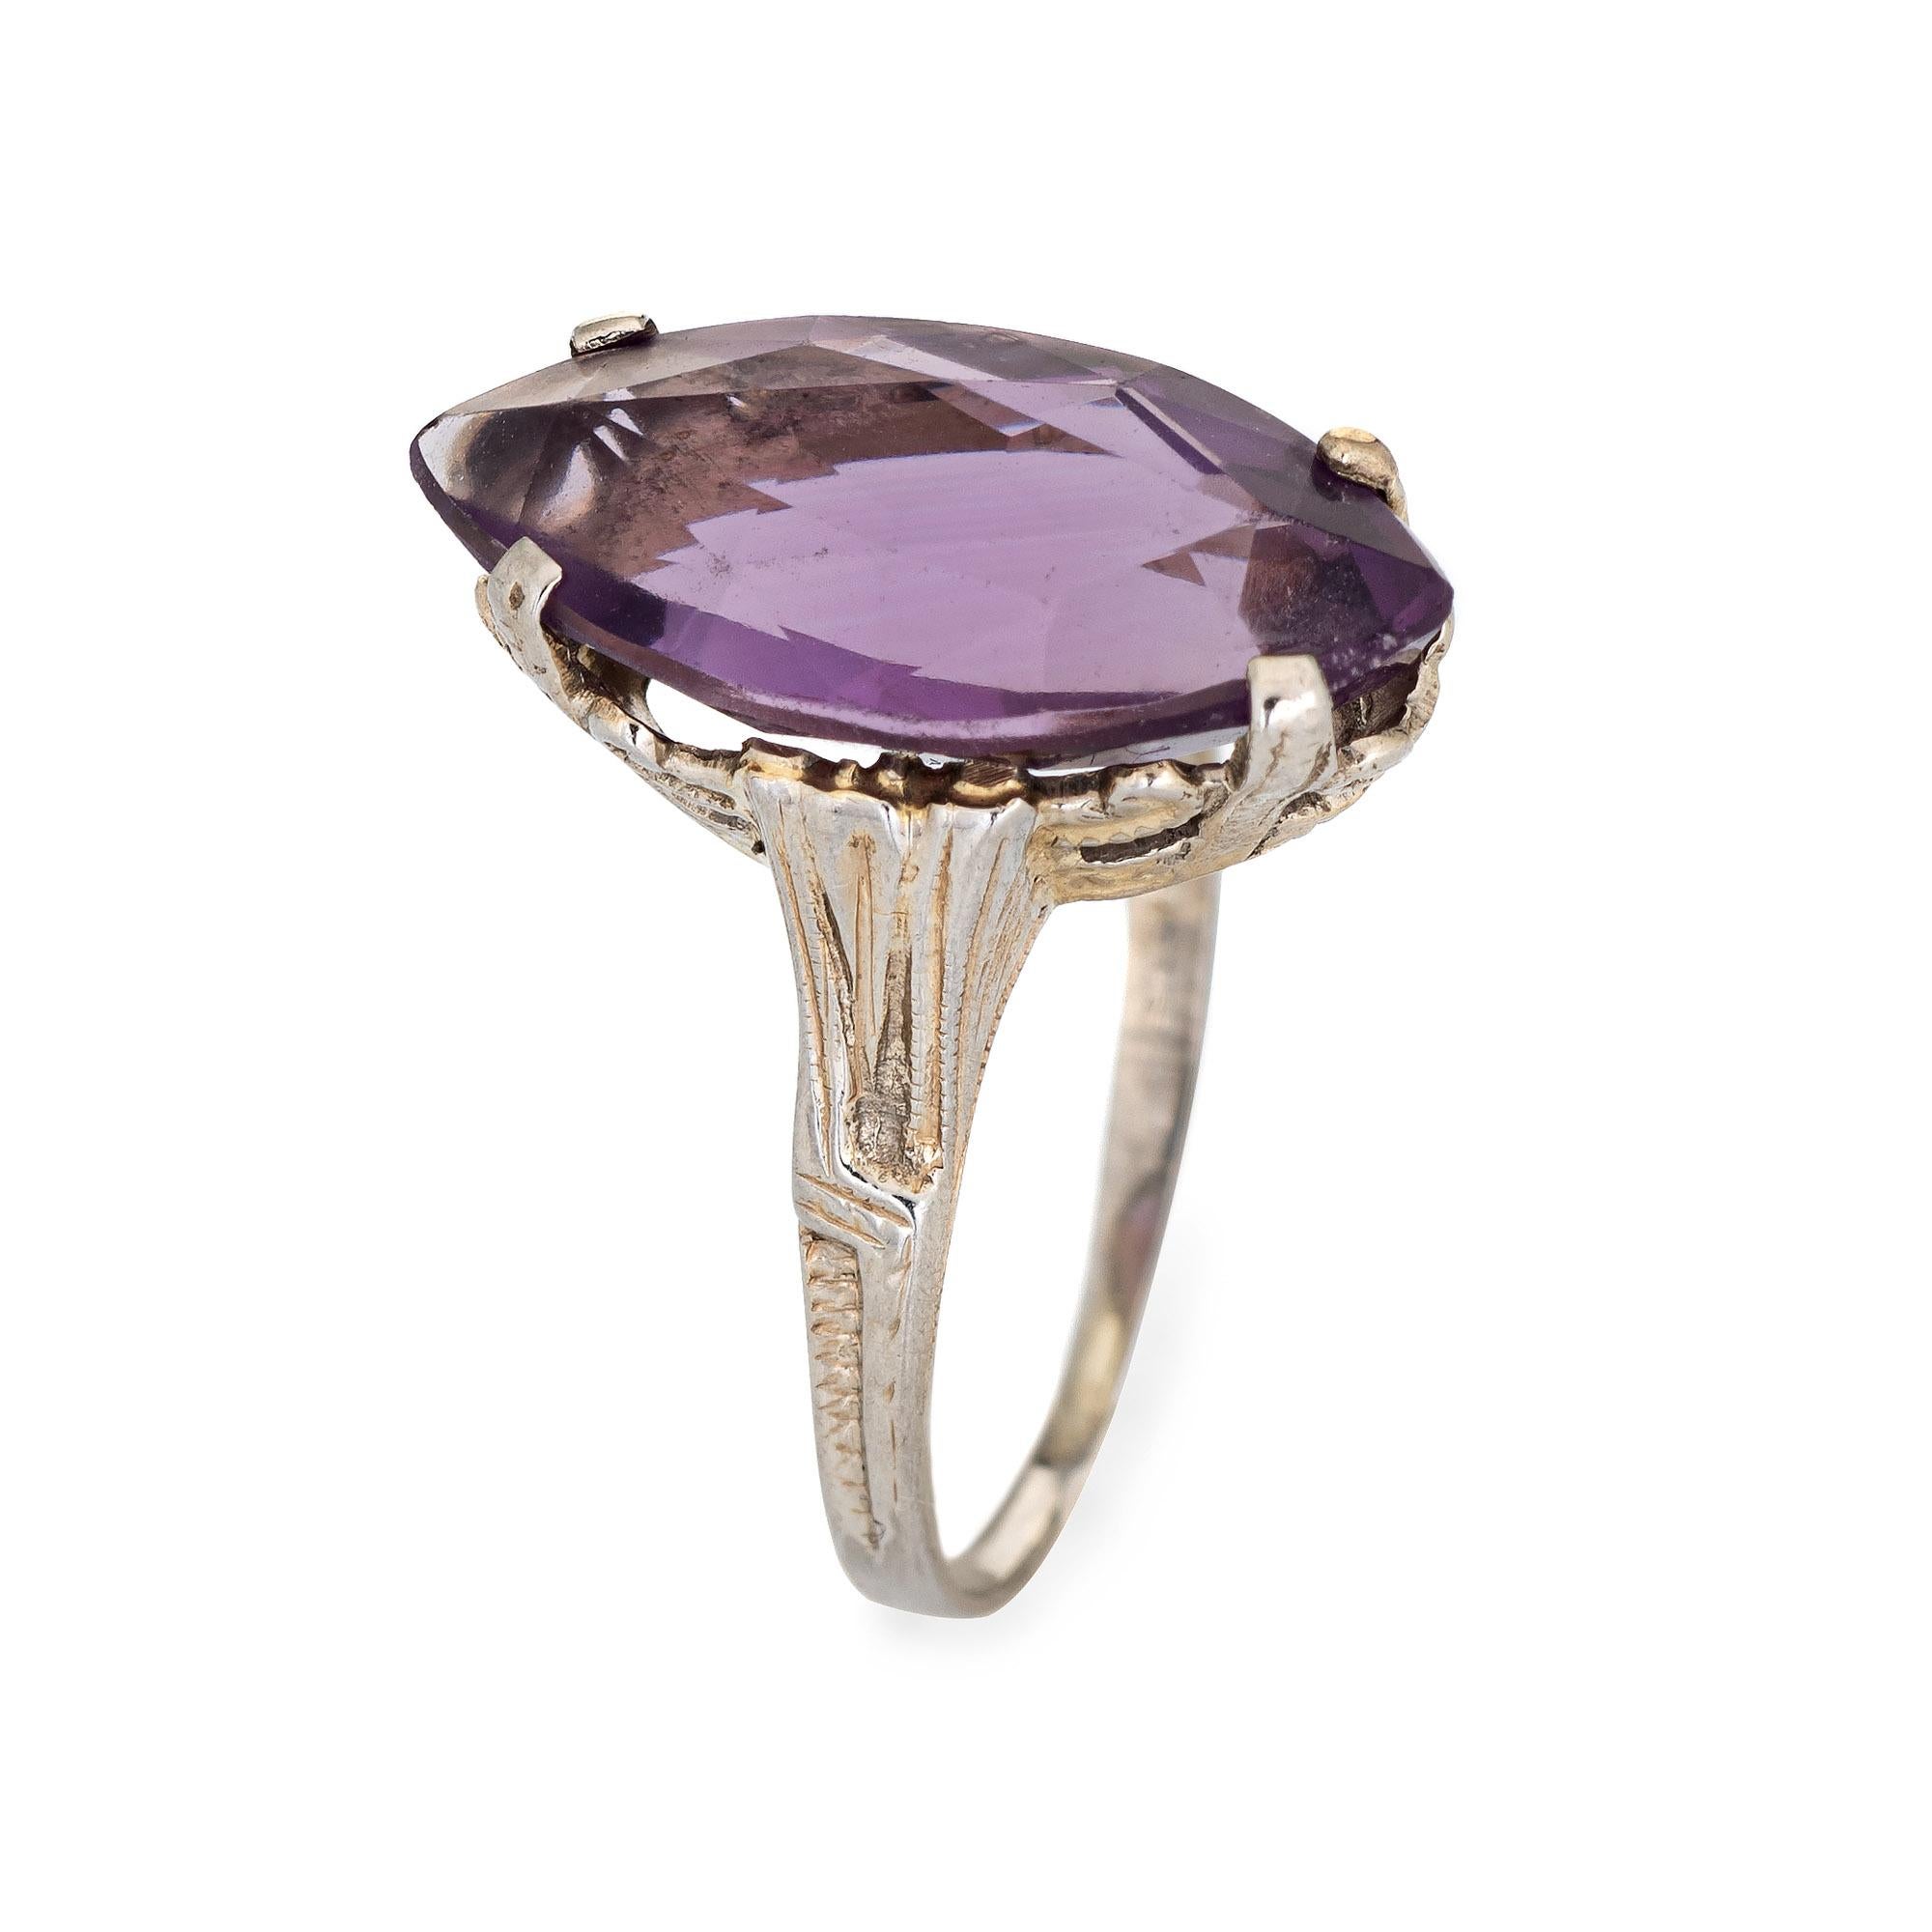 Finely detailed vintage Art Deco amethyst ring (circa 1920s to 1930s) crafted in 18k white gold. 

Marquise cut amethyst measures 18mm x 9mm. Note: few light surface abrasions from wear visible under a 10x loupe).   

The stylish Art Deco era ring